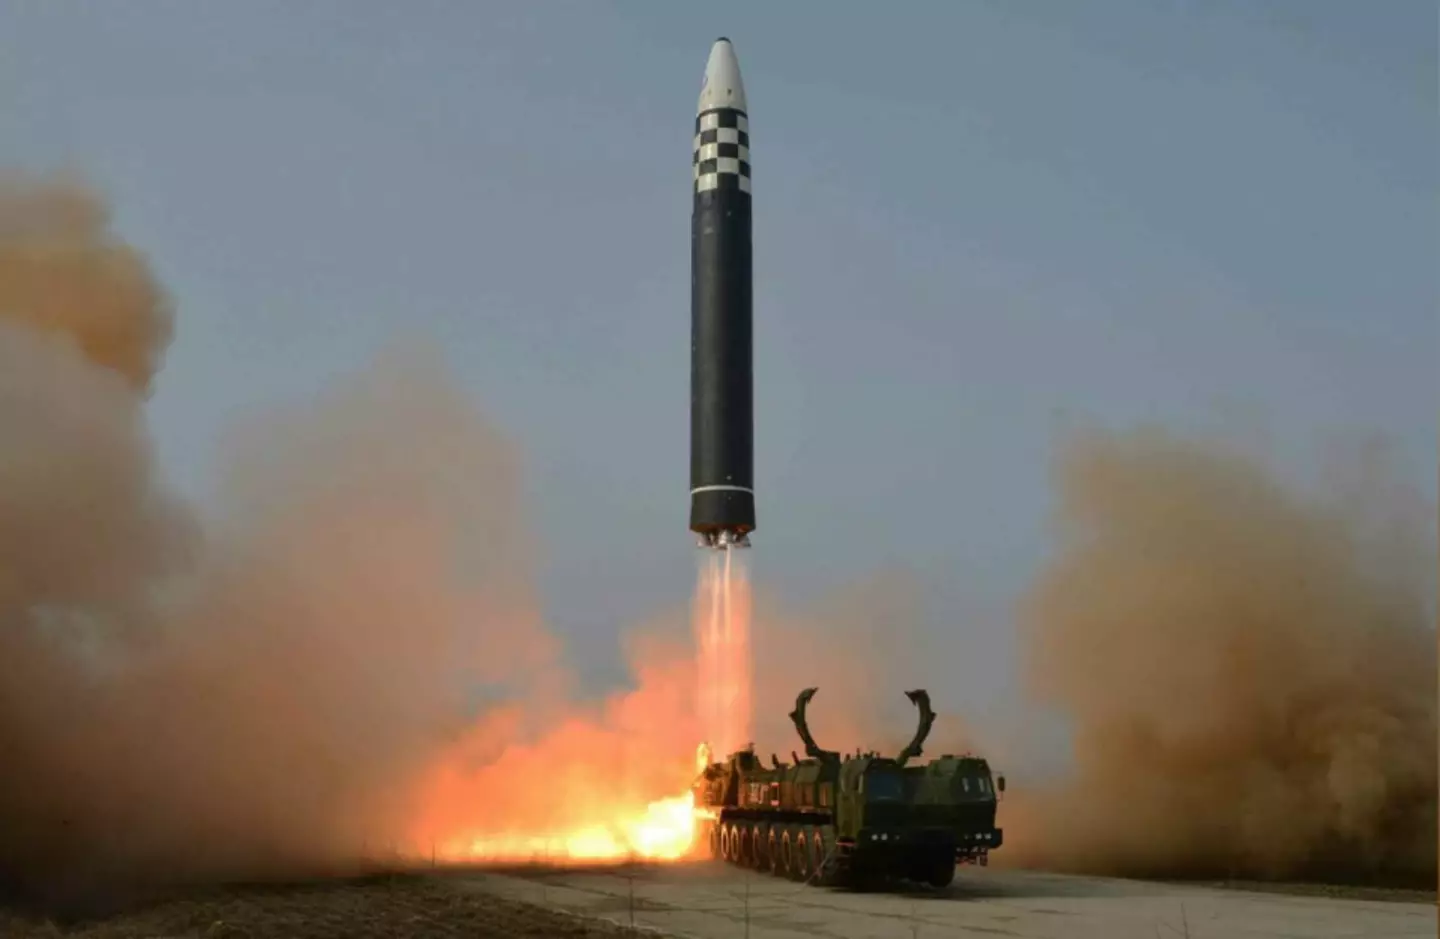 ICBM launch conducted by North Korea.